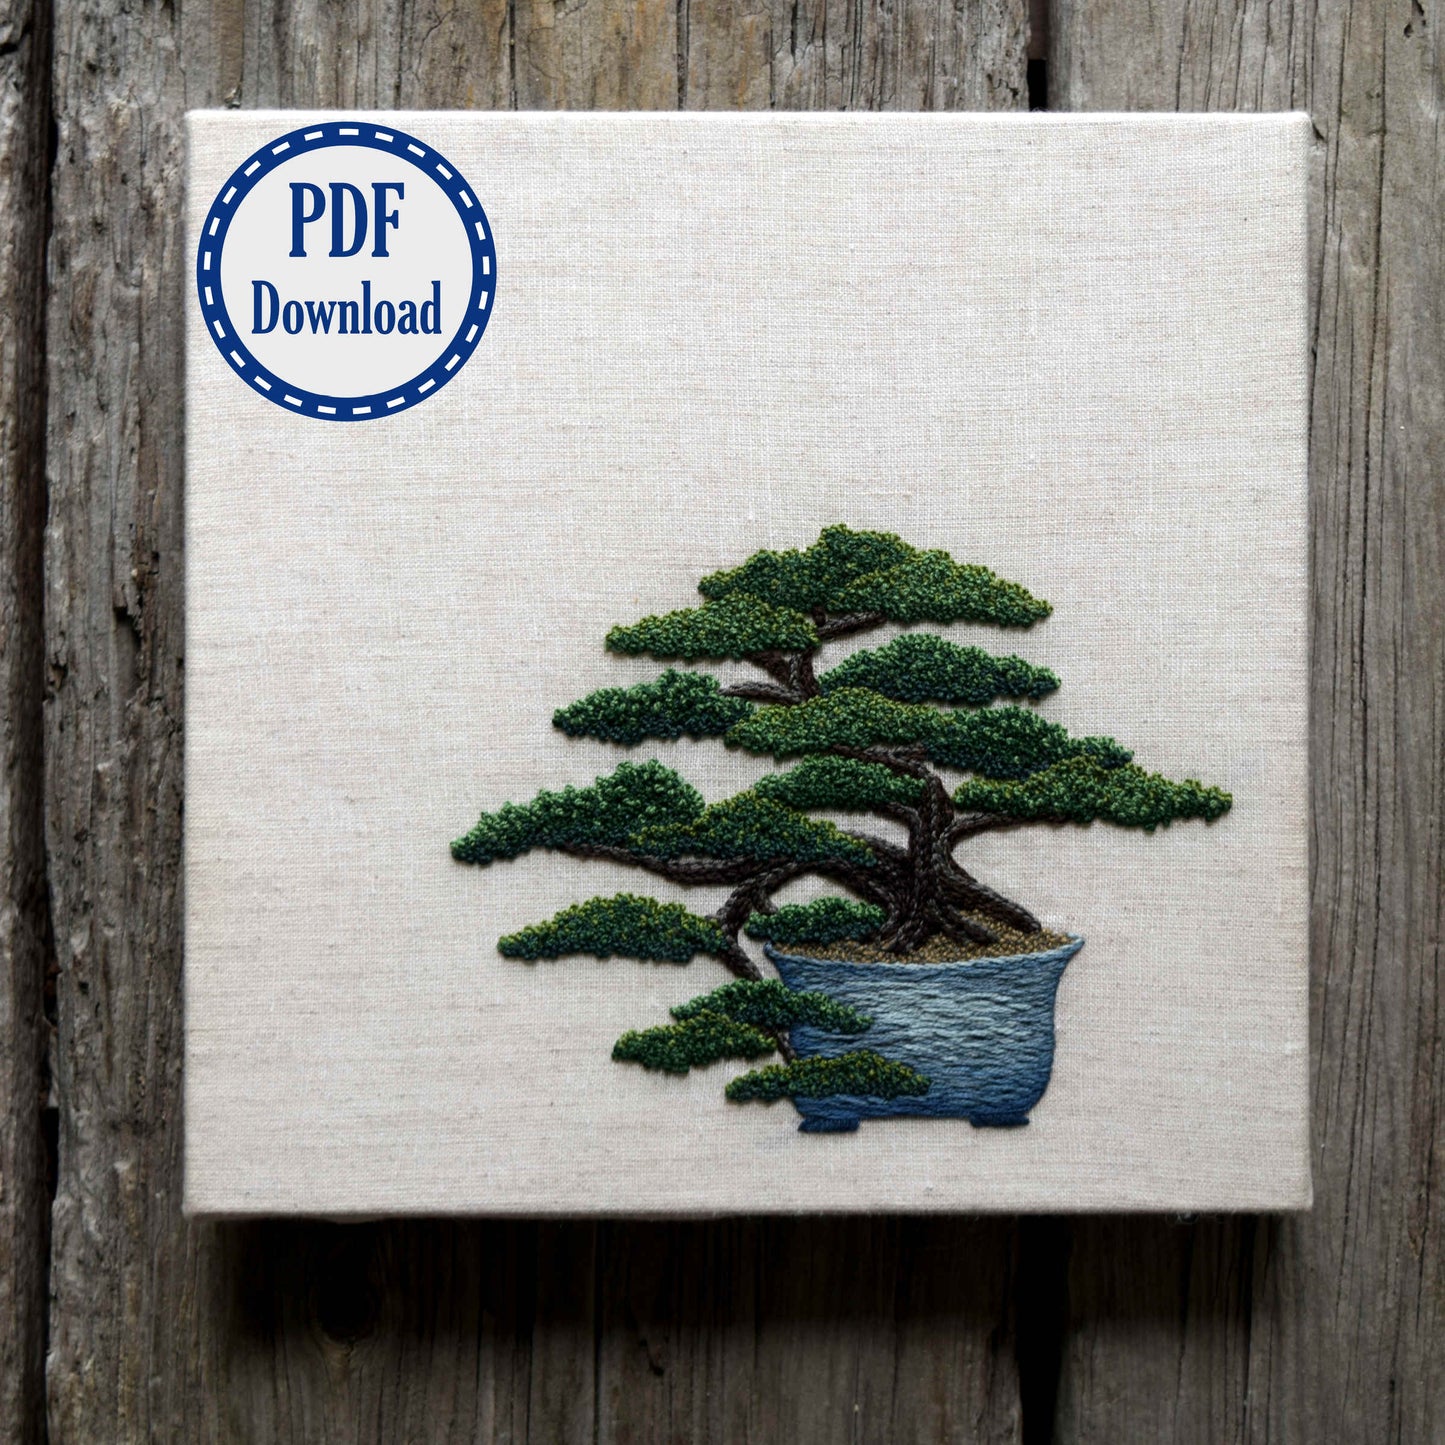 Framed piece of hand embroidery showing a Japanese bonsai tree in a blue pot on an oatmeal colored canvas. PDF download badge in corner.